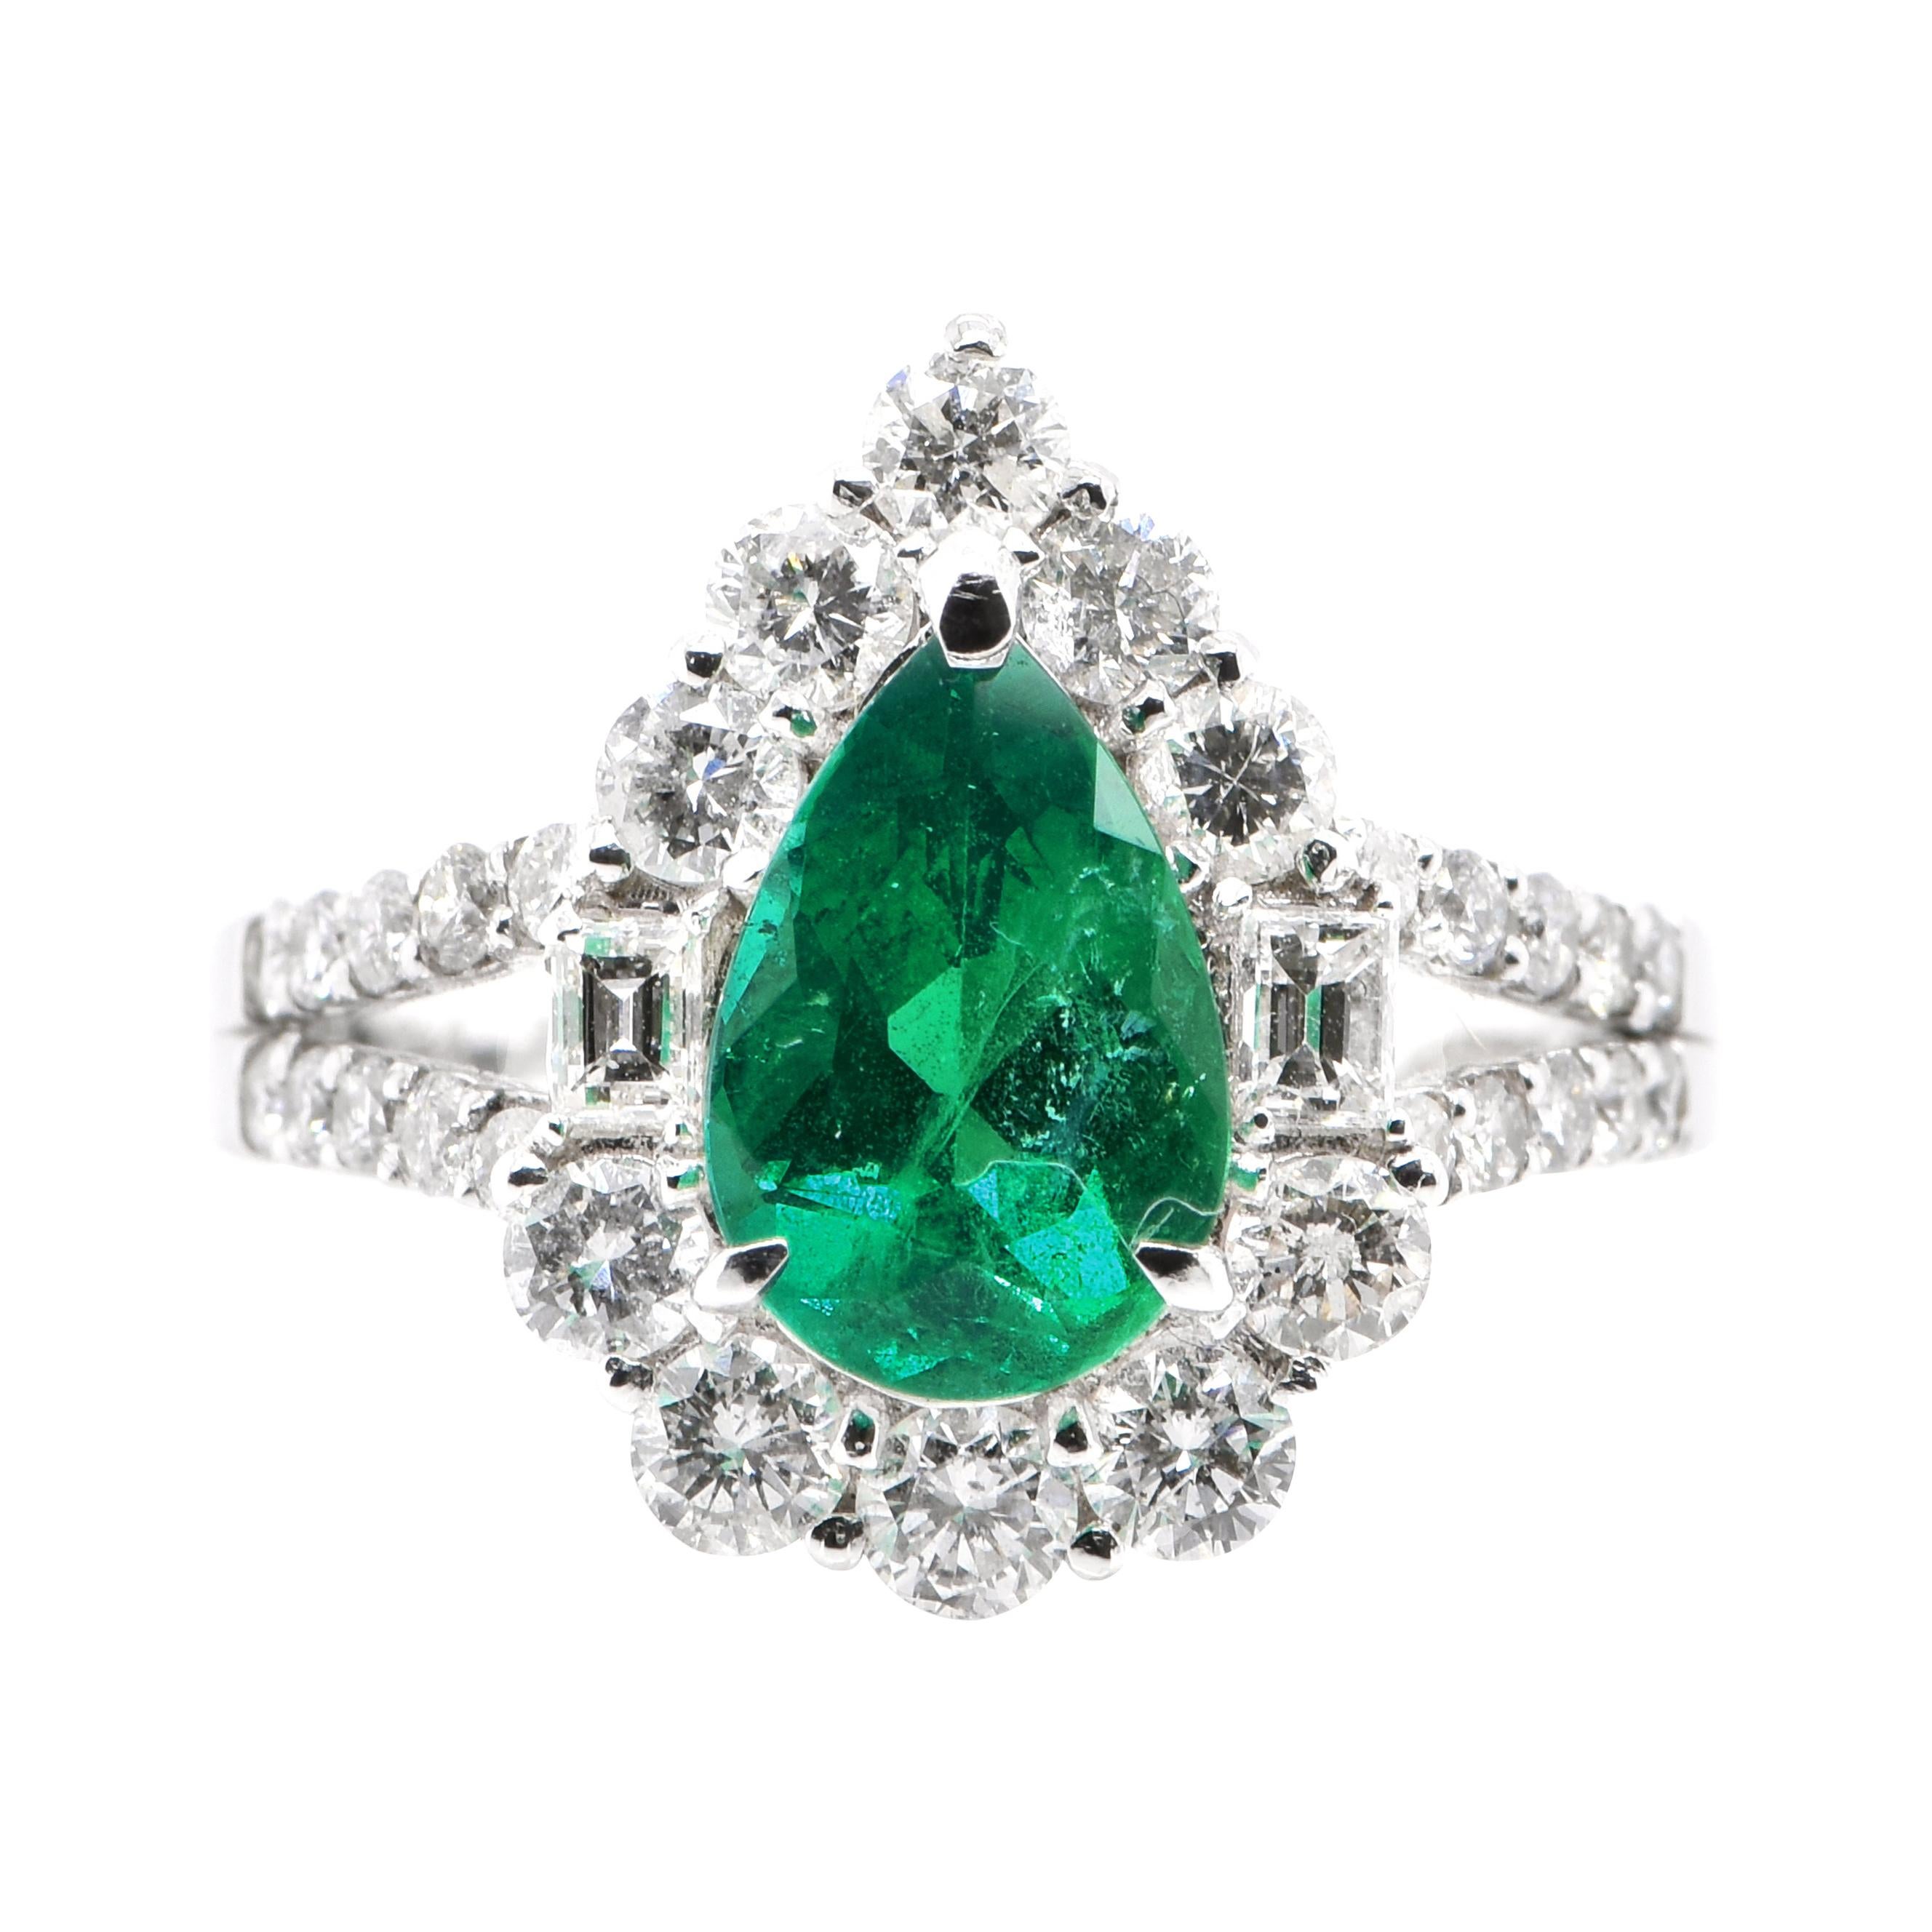 1.64 Carat Natural Pear Shape Emerald and Diamond Ring Set in Platinum